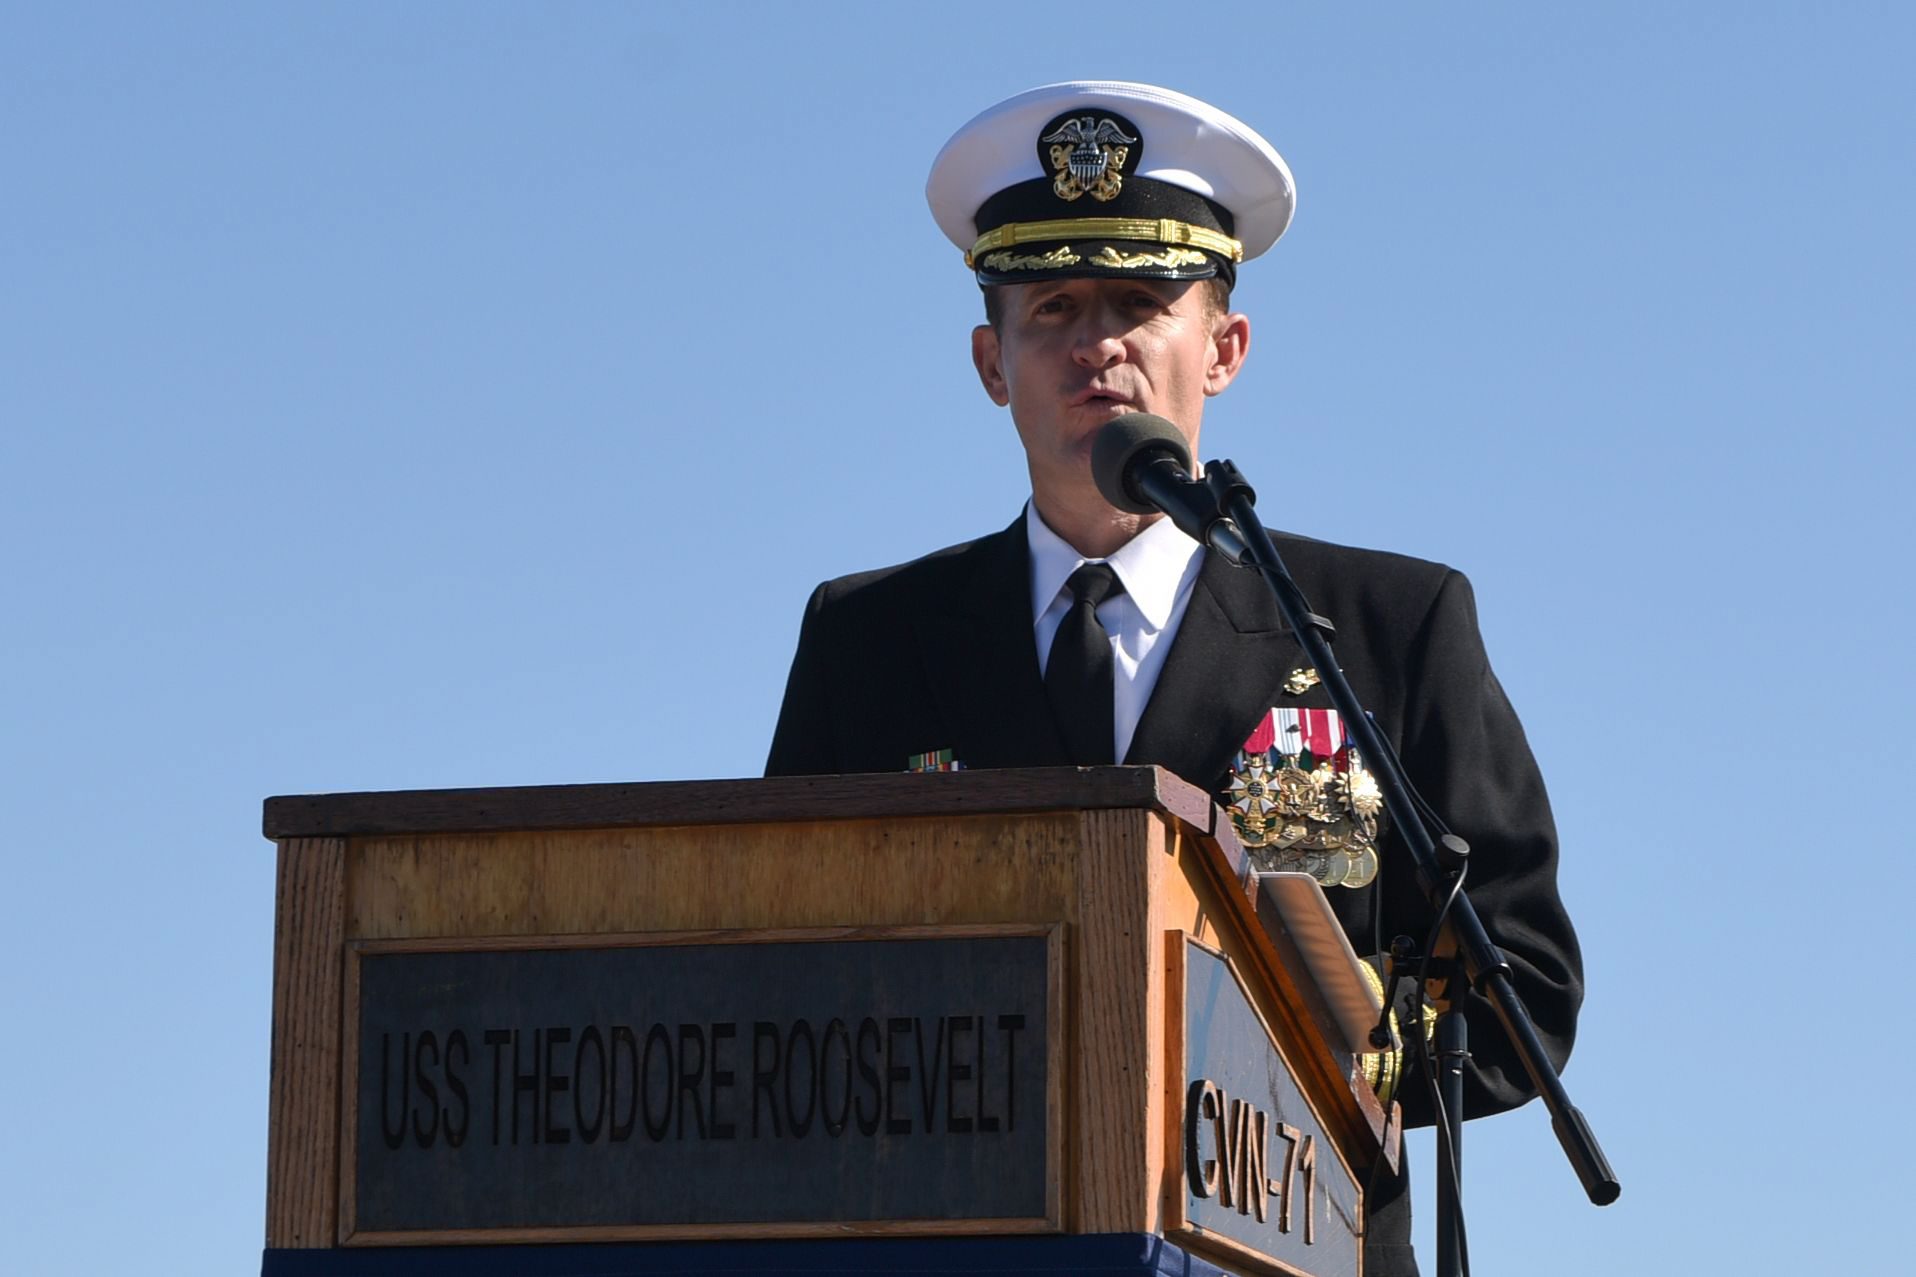 This handout photo released by the US Navy shows Captain Brett Crozier addressing the crew for the first time as commanding officer of the aircraft carrier USS Theodore Roosevelt (CVN 71) during a change of command ceremony on the ships flight deck in San Diego, California on November 1, 2019. - The Pentagon removed the captain of the coronavirus-stricken USS Theodore Roosevelt Thursday, saying he mishandled communications over how the outbreak was sweeping through the warship. Brett Crozier 